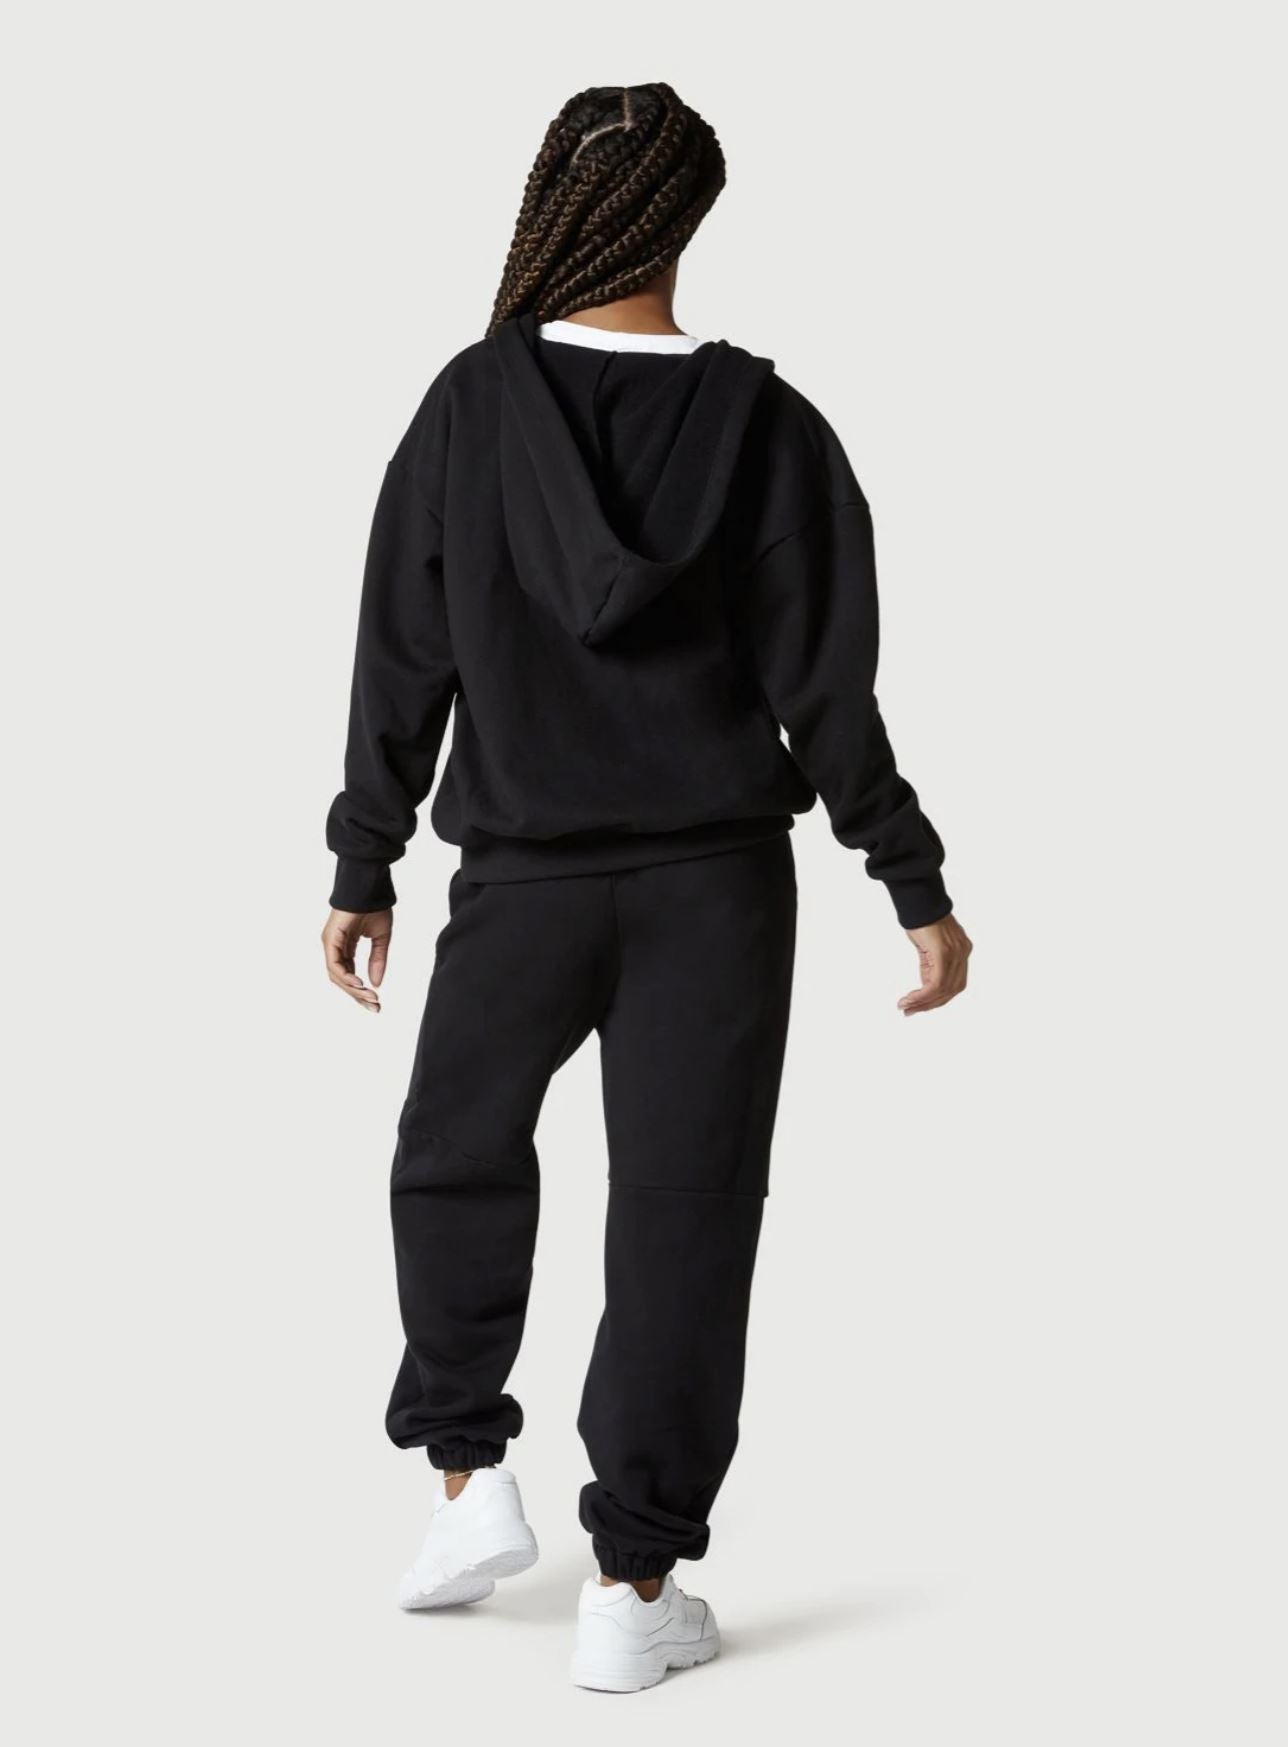 Bring it on Full Zip Black Hoodie | NUX style #H0294 | Made in the USA | Classy Cozy Cool Women’s Clothing Boutique | Matching Sweat Suit